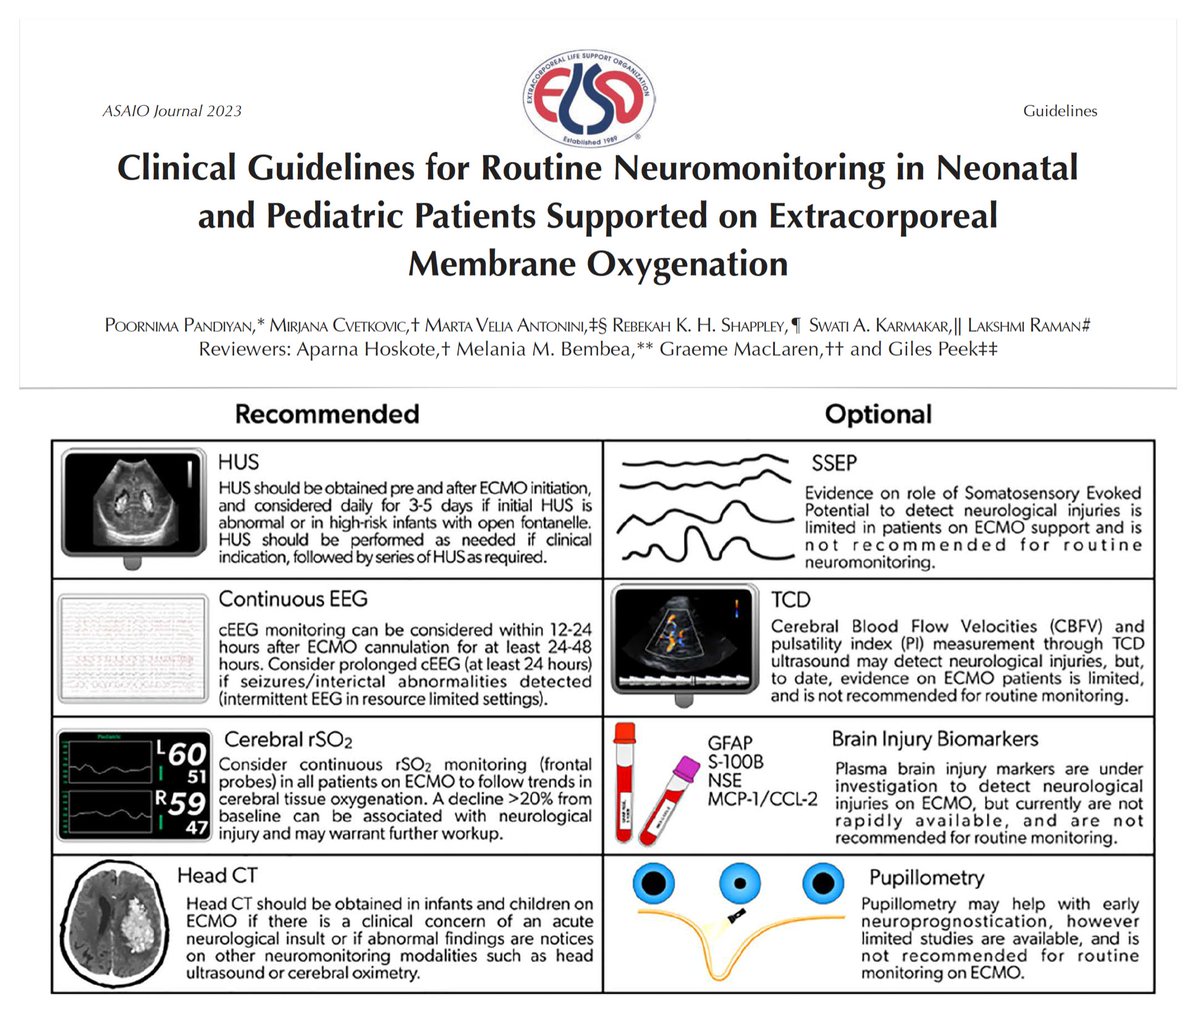 Neuromonitoring in neonatal & pediatric patients on #ECMO, key recommendations on multimodal approach 🔓 bit.ly/44hZ1Q0
🖥️ head #POCUS 
☢️ CT 
🧠 rSO2
⚡️ EEG
🖥️ doppler #ultrasound
🧪 plasma BI markers
〰️ SSEP 
👁️ pupillometry 
Clinical @elsoorg guidelines in all + high…